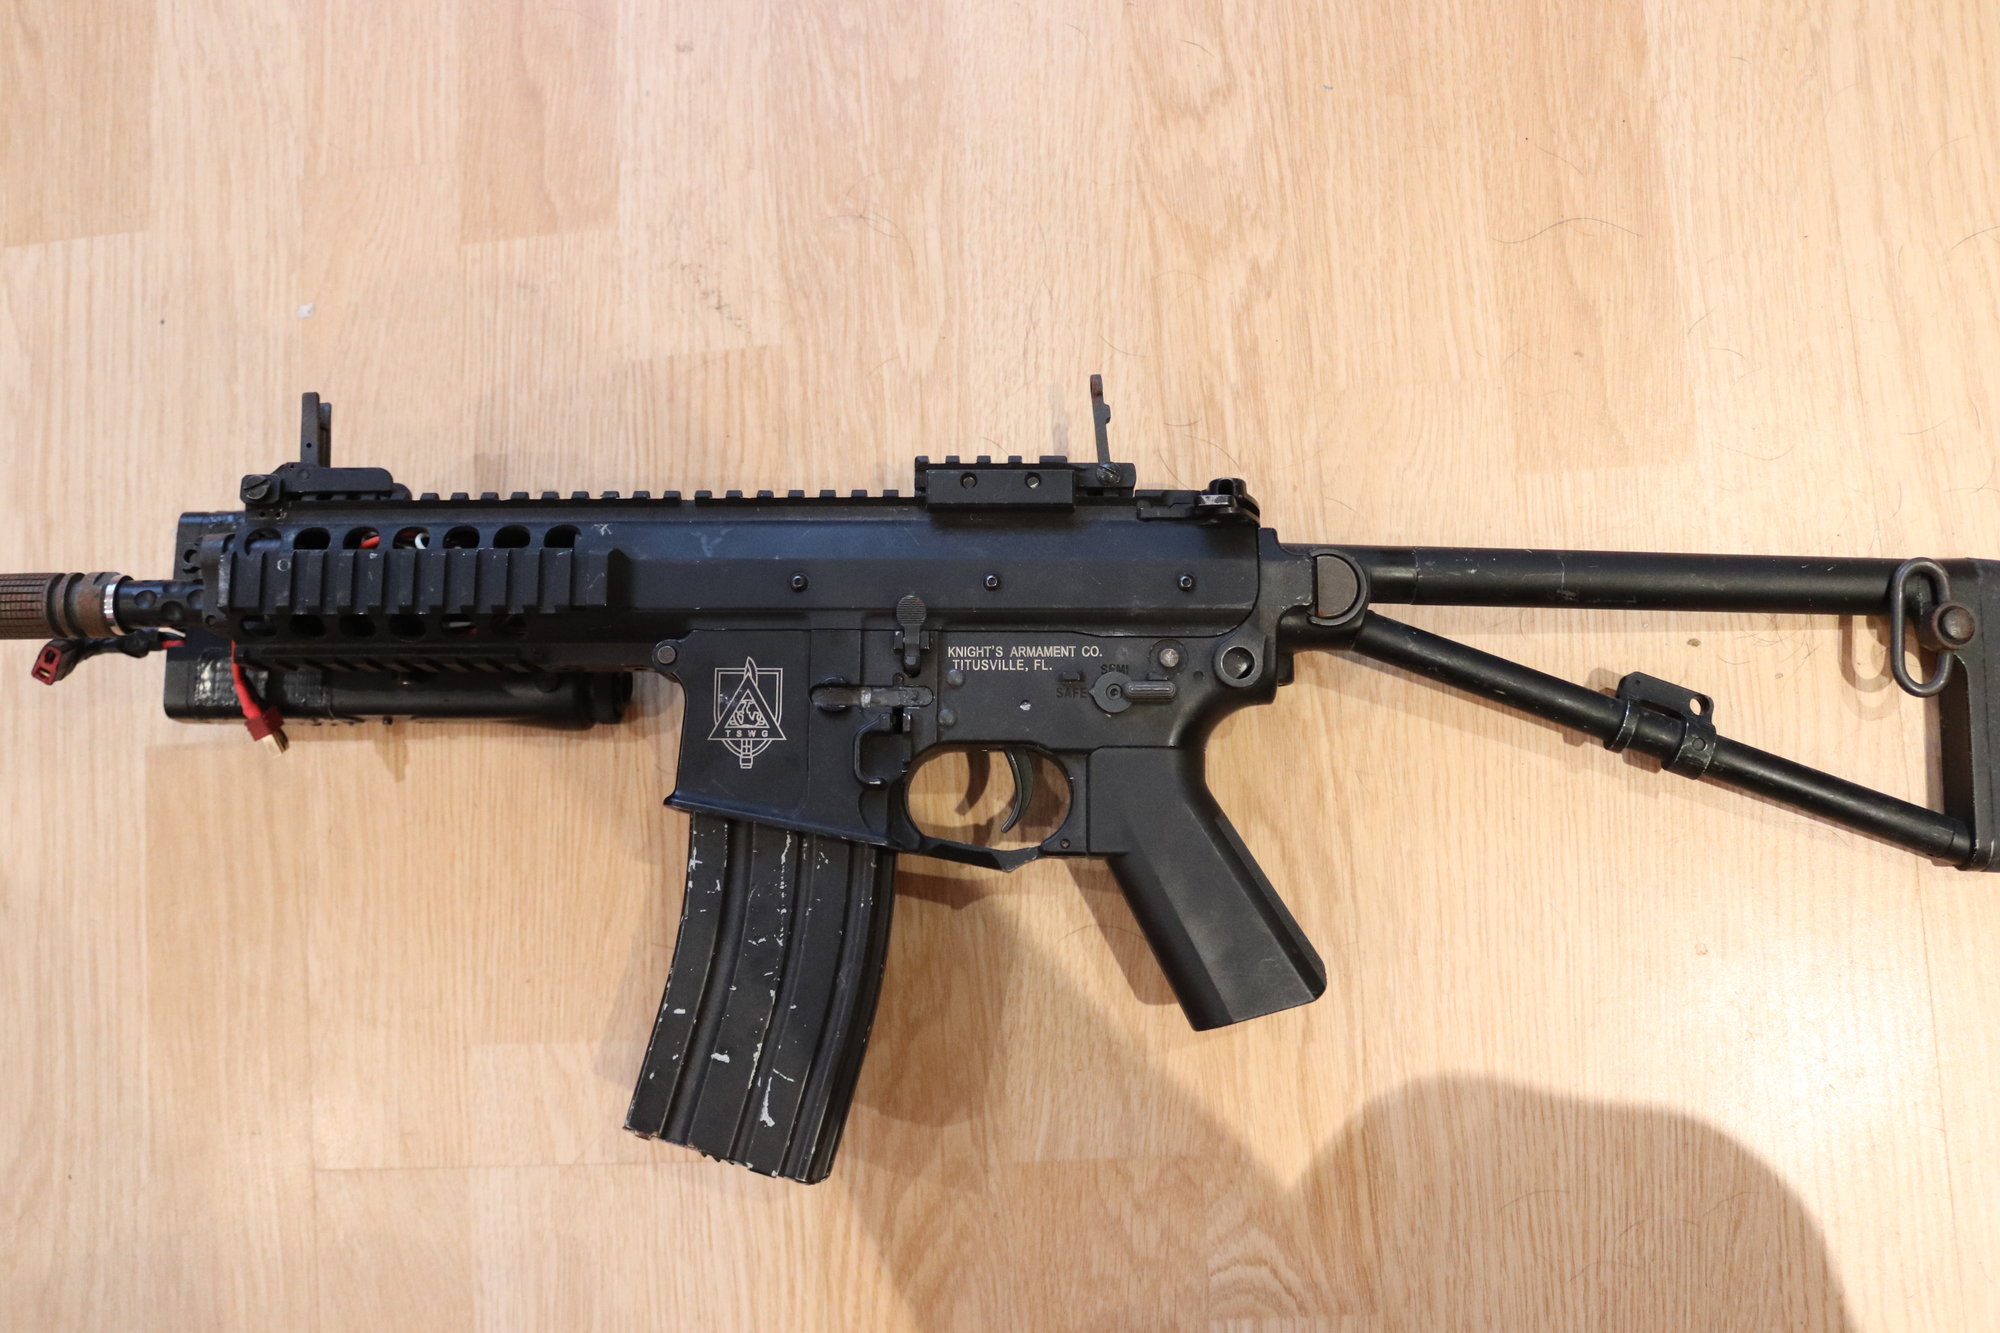 D BOYS KAC PDW for repair - Electric Rifles - Airsoft Forums UK